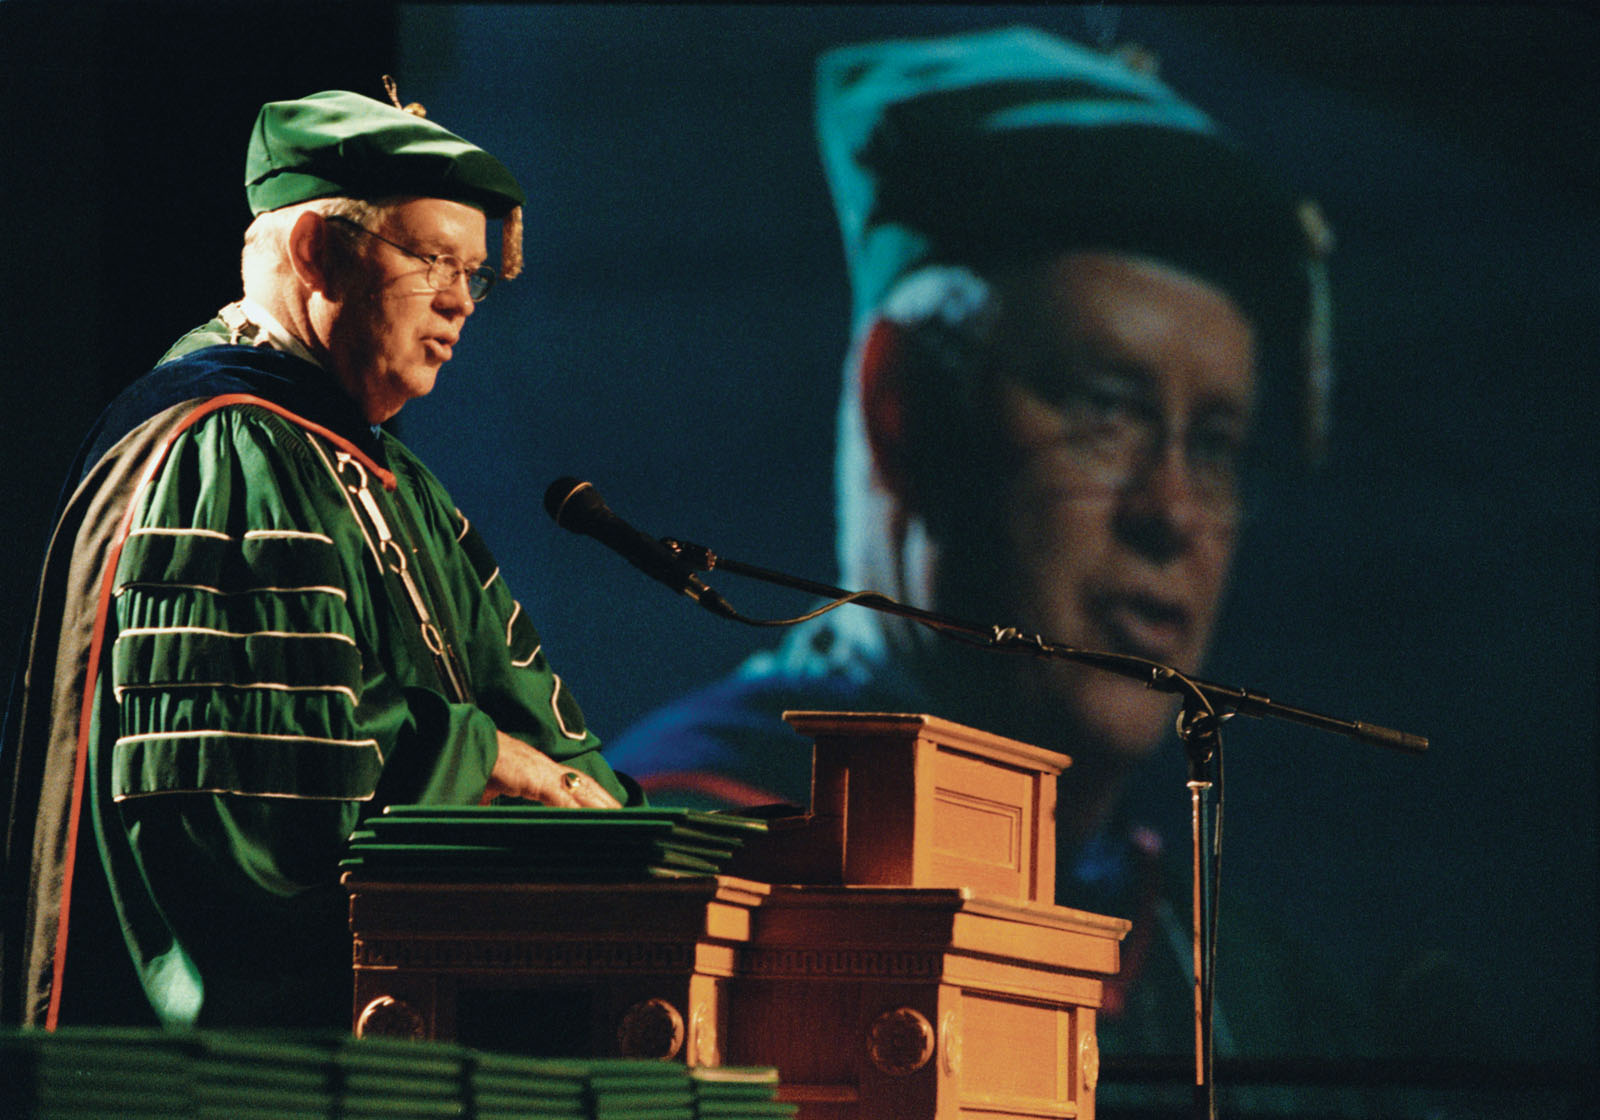 President Hubbard addresses graduates and their families during the December 2000 graduation ceremony in Bearcat Arena.